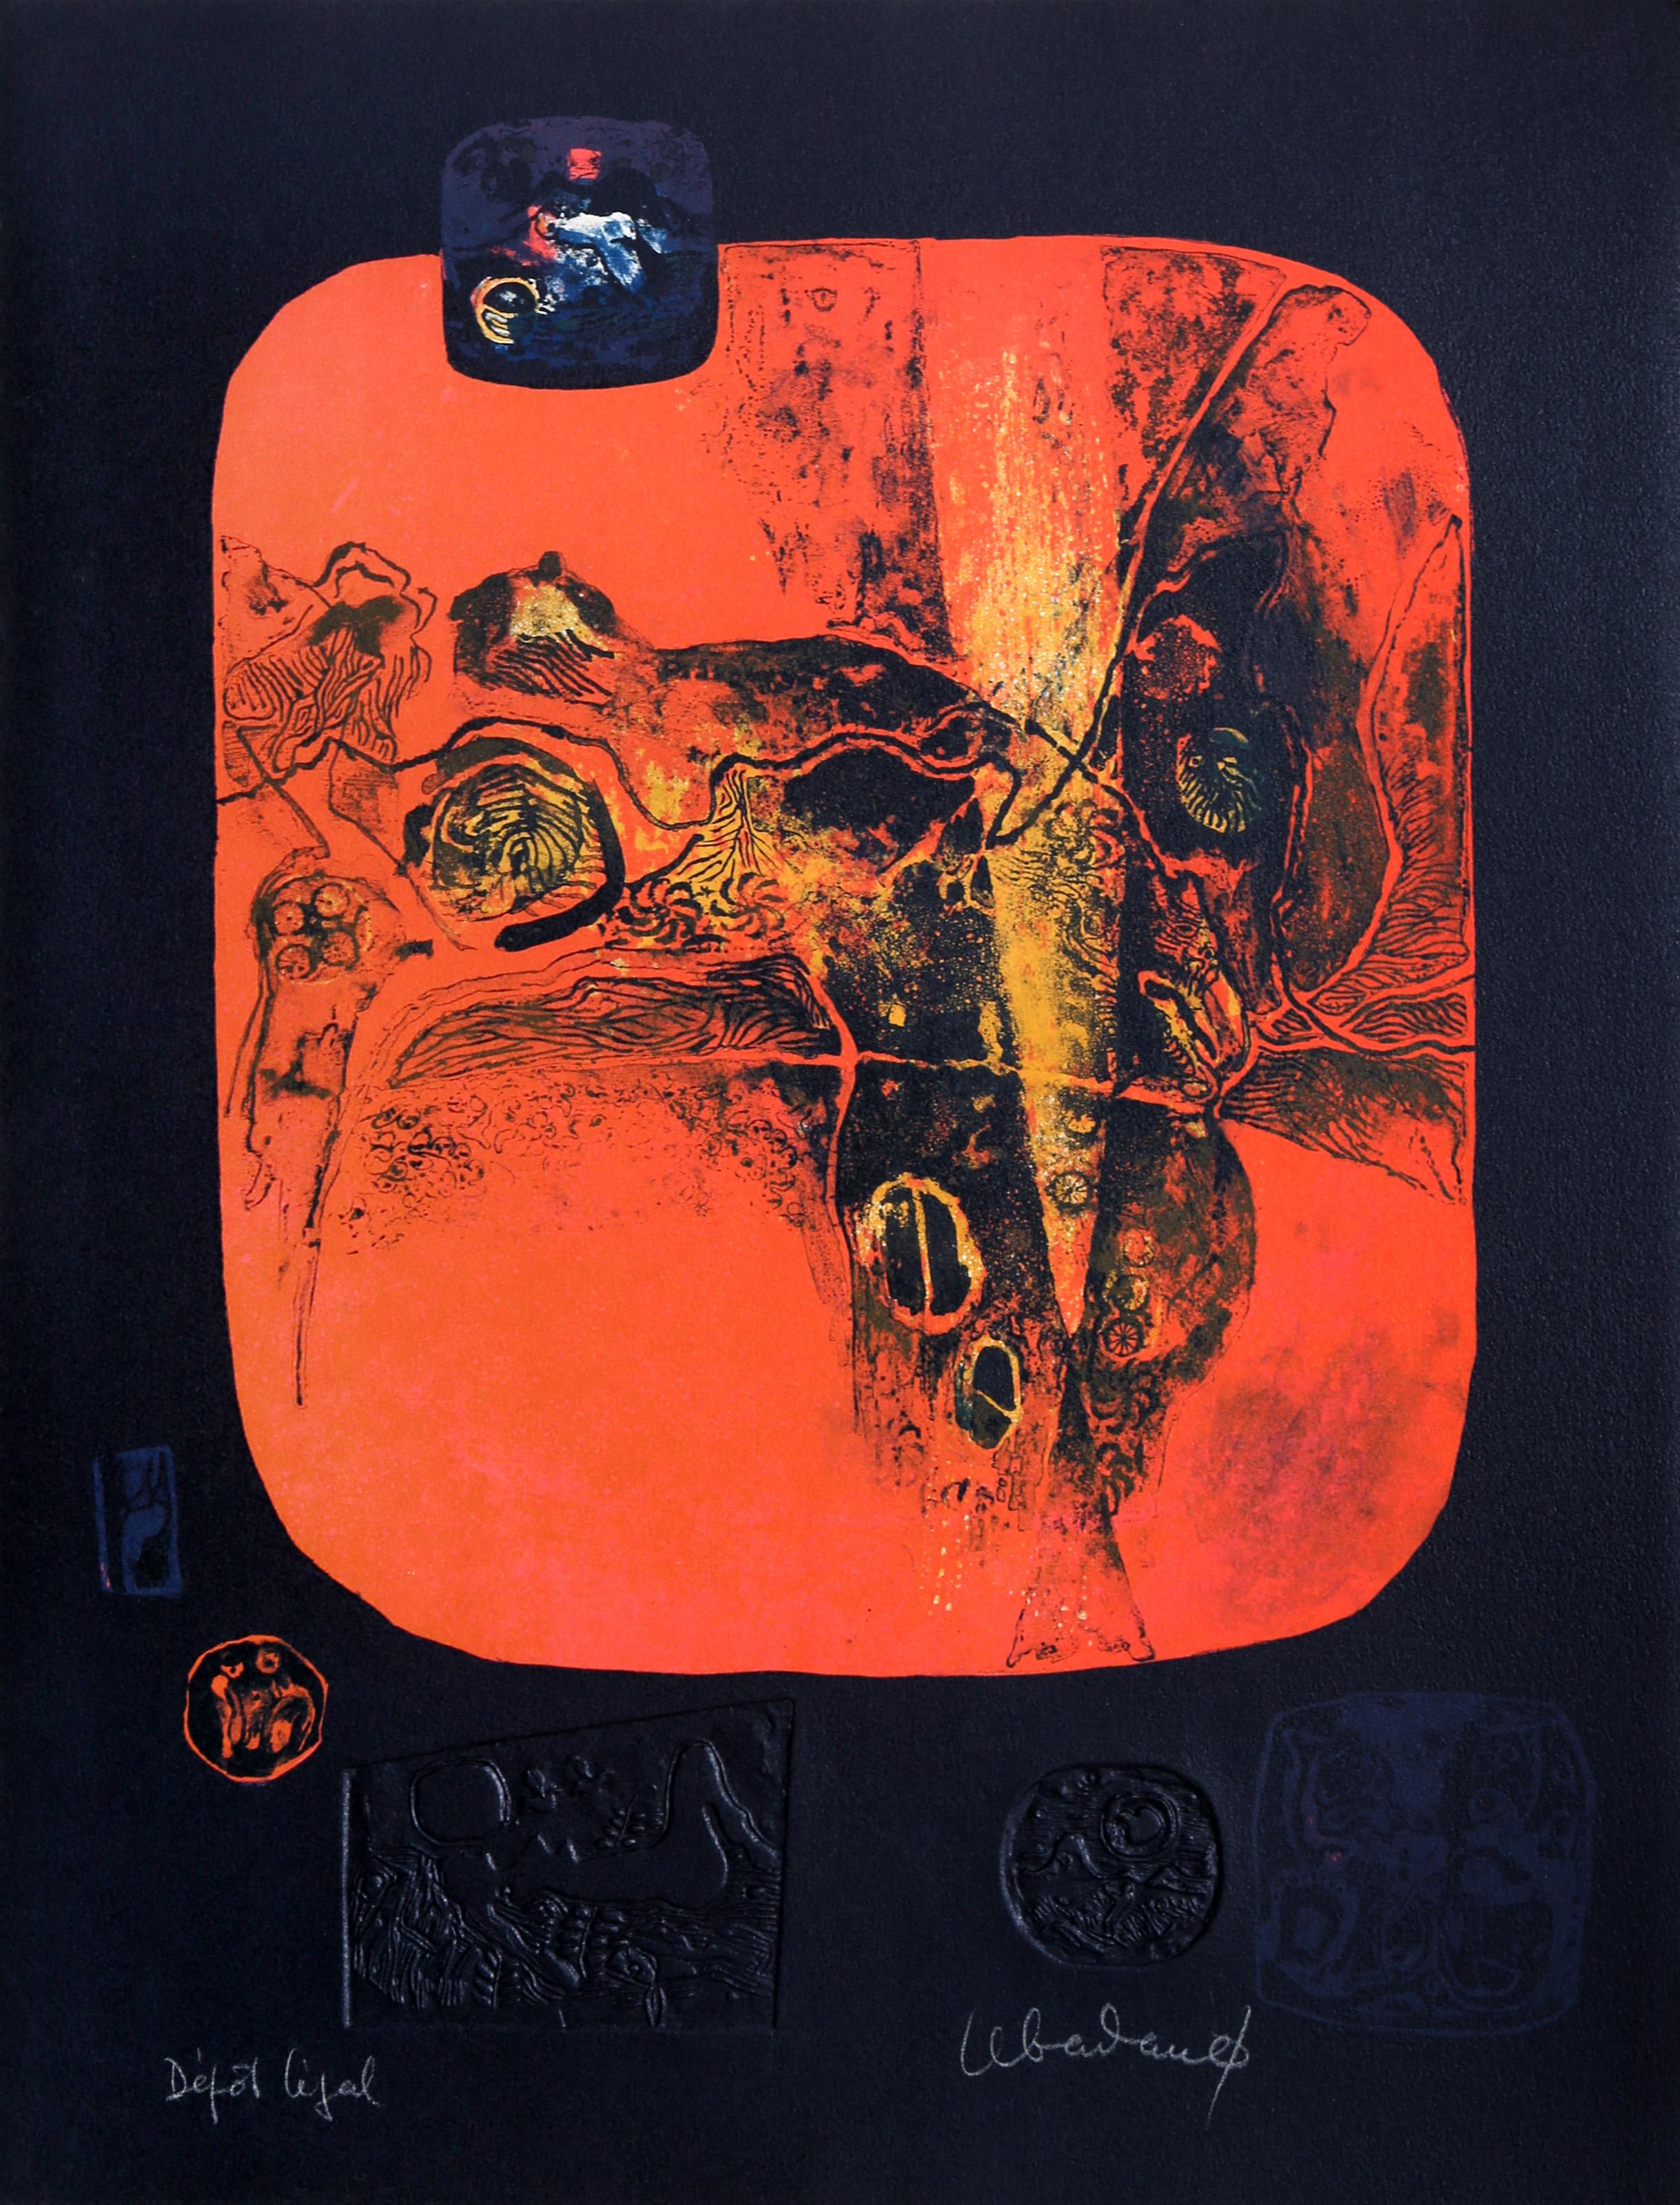 Lebadang (aka Hoi), Vietnamese (1922 - 2015) -  Landscape in Orange. Medium: Lithograph with Embossing, signed and numbered in pencil, Edition: E.A., Image Size: 17 x 14.75 inches, Size: 26 x 20 in. (66.04 x 50.8 cm), Description: Lebadang was a